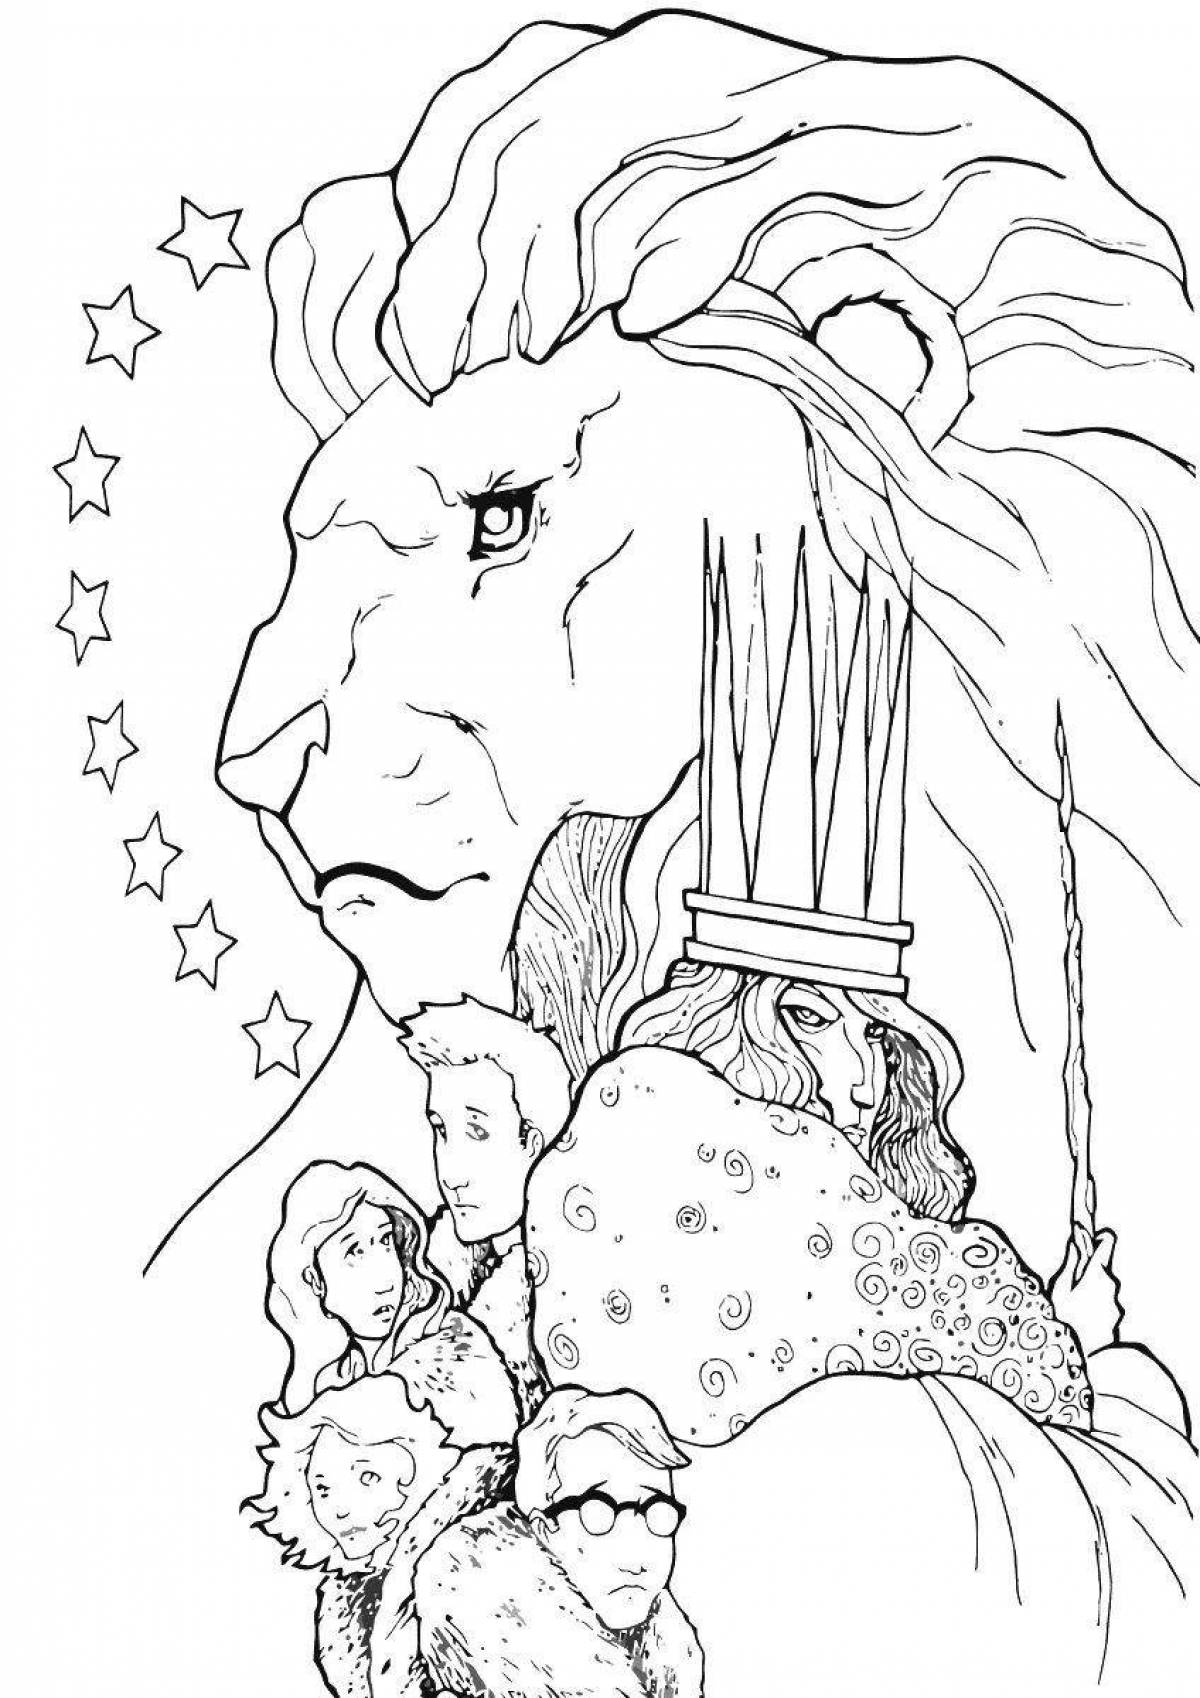 Splendid chronicles of narnia coloring book